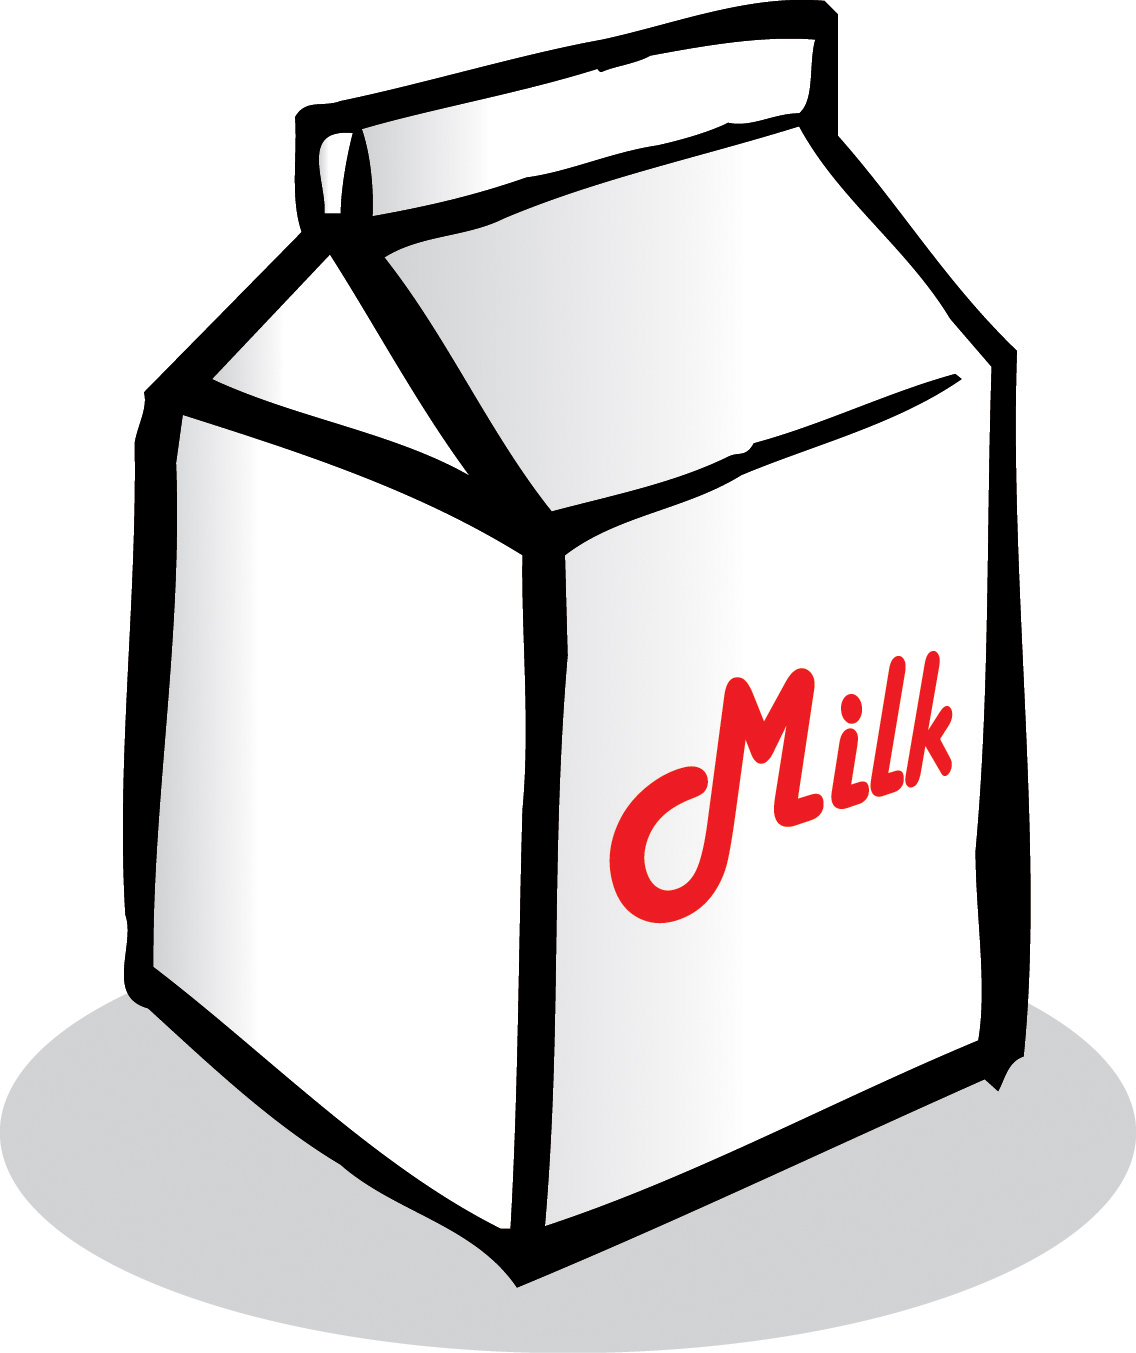 Milk and juice clipart